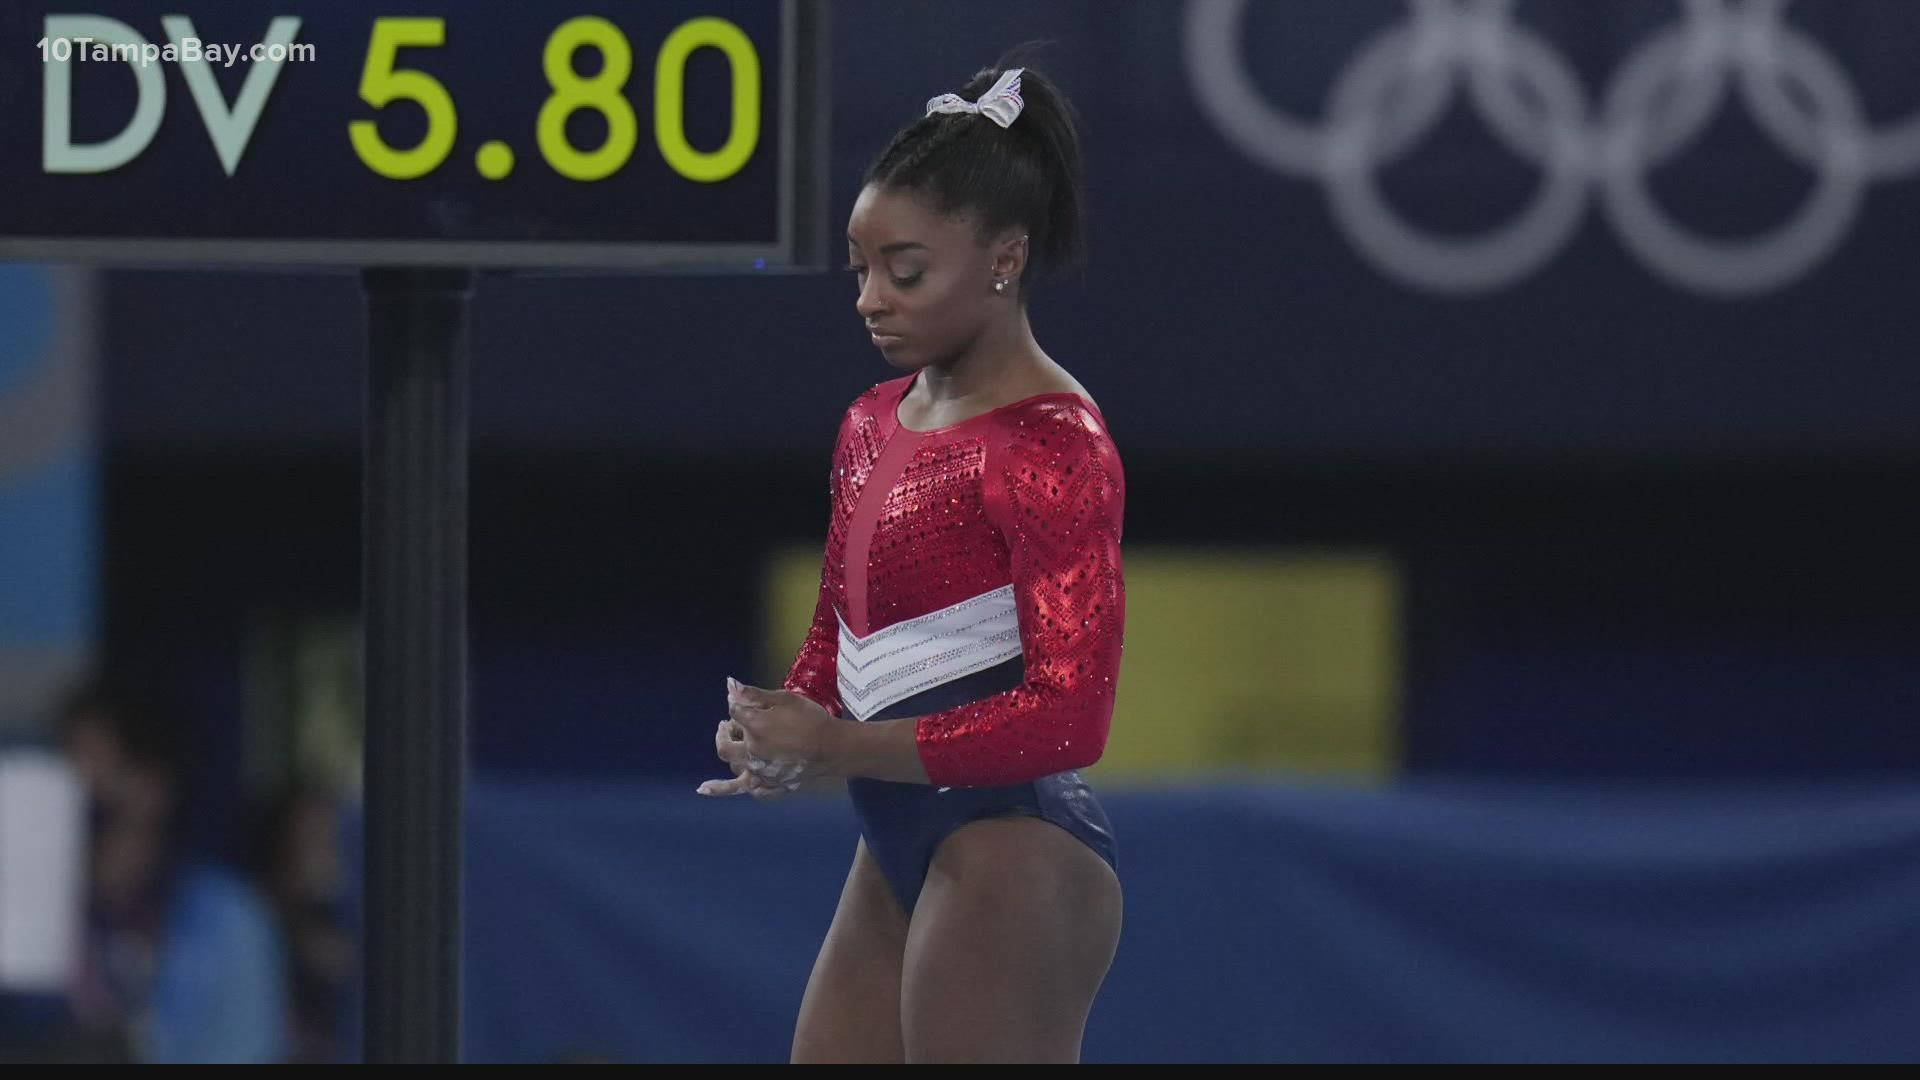 Biles also sent a message to the "know it alls" about why she said an alternate could not have taken her place in the team competition.